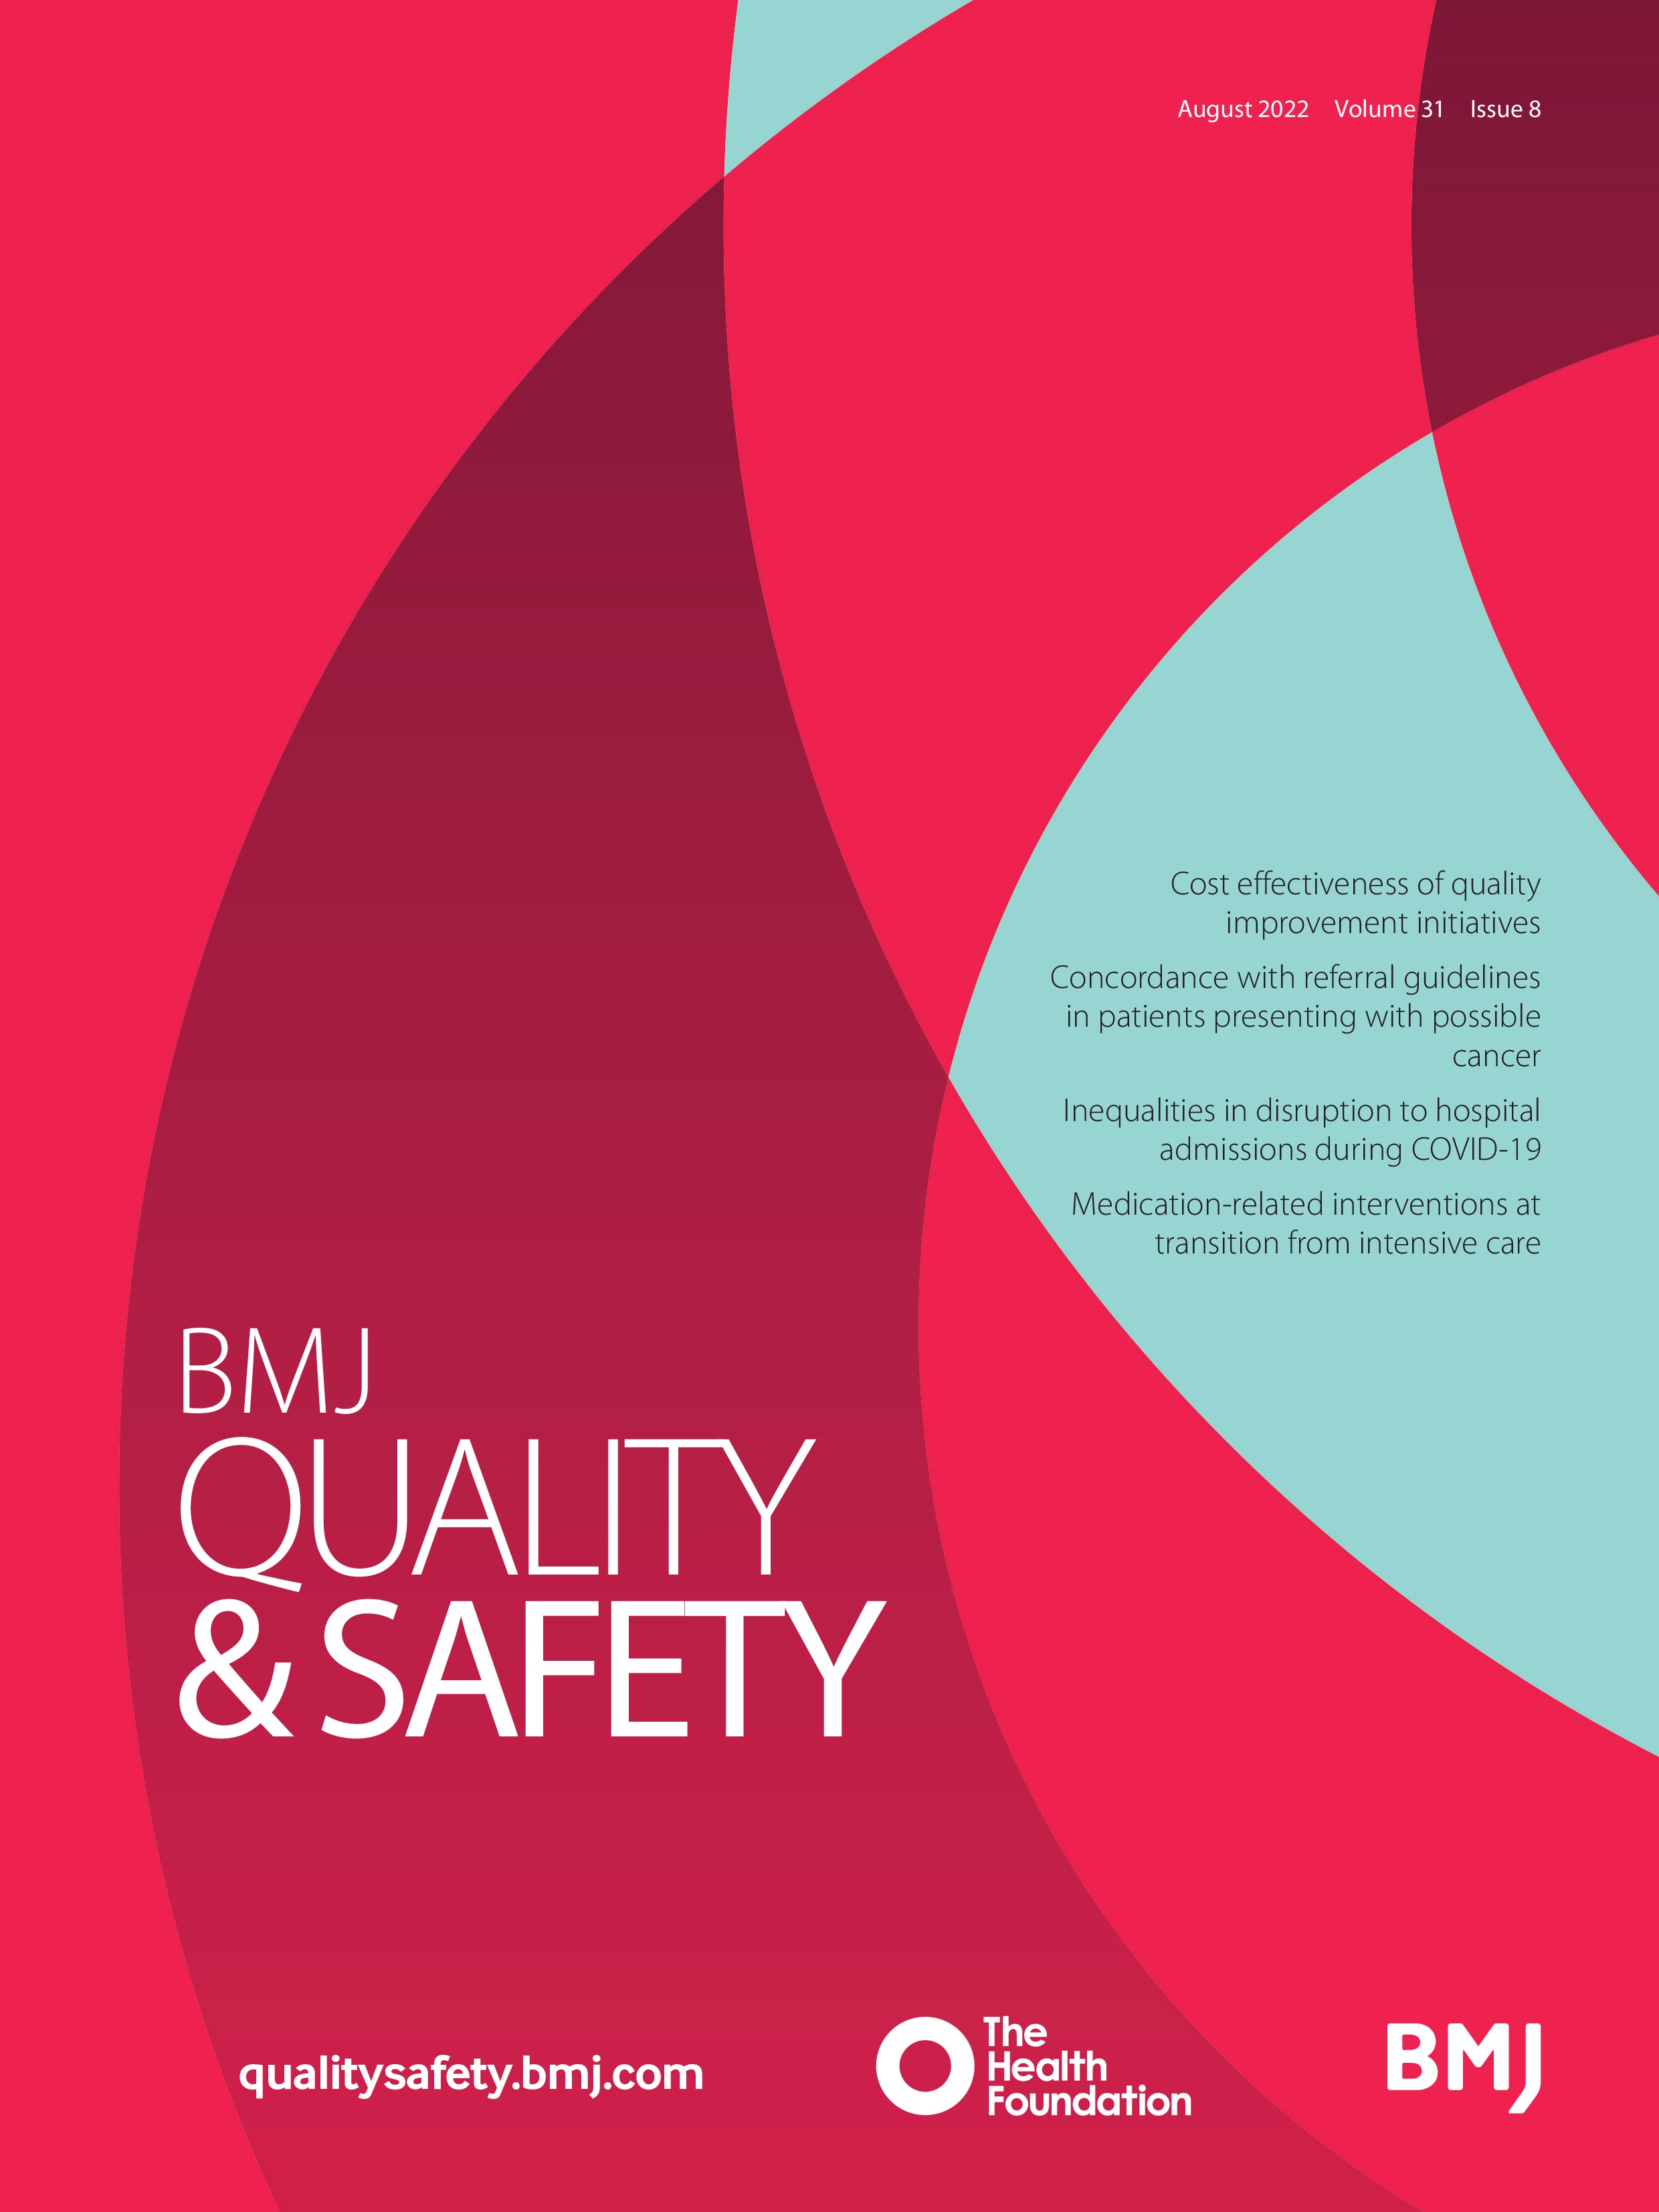 Medication-related interventions to improve medication safety and patient outcomes on transition from adult intensive care settings: a systematic review and meta-analysis